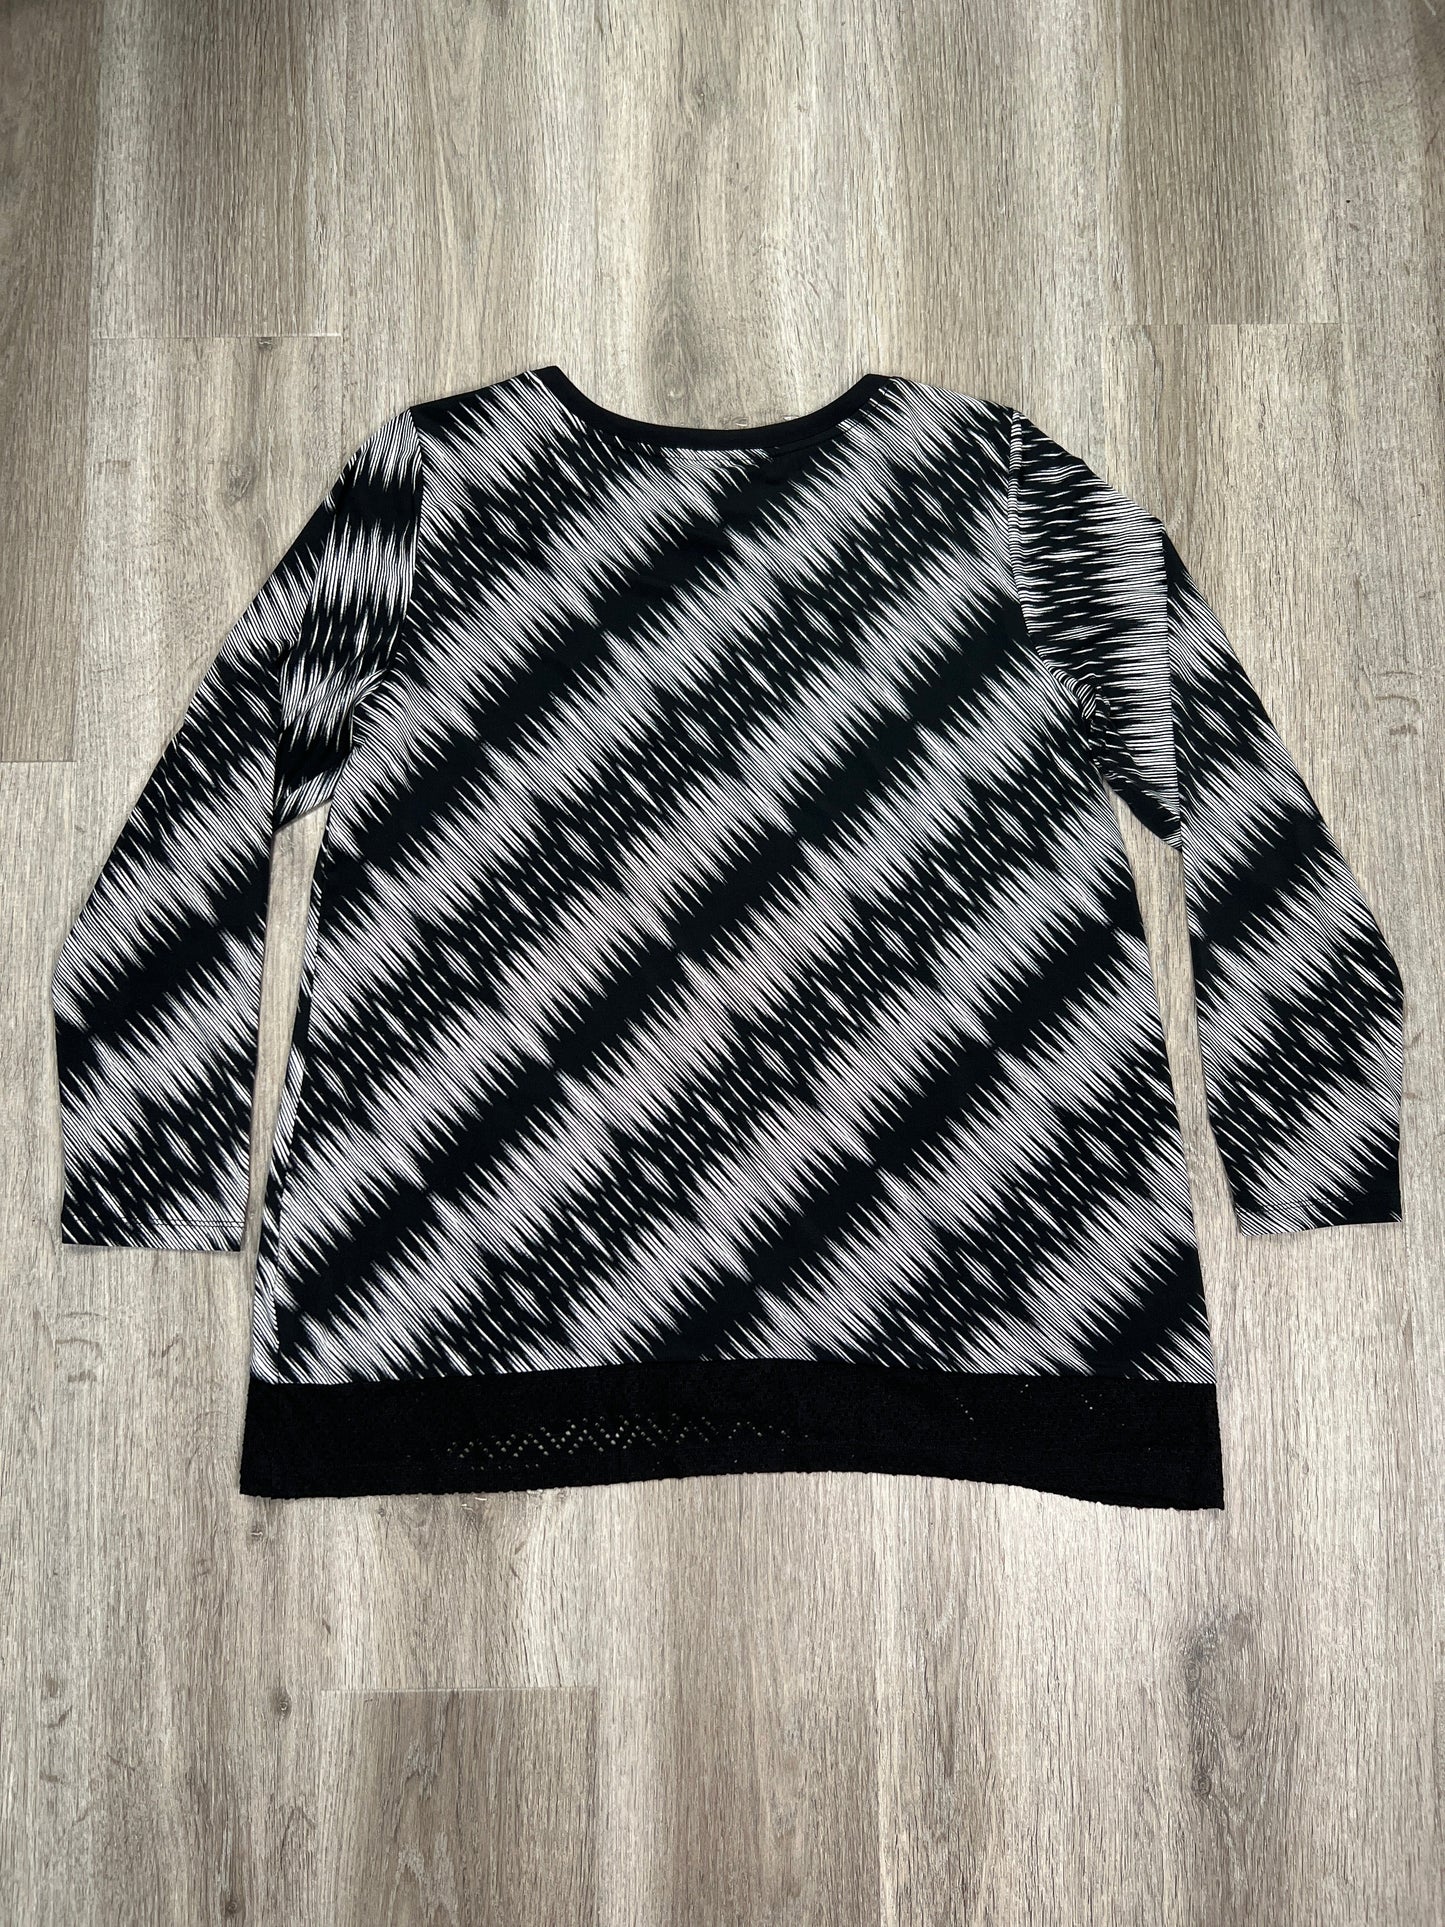 Black & White Top Long Sleeve Christopher And Banks, Size Xl